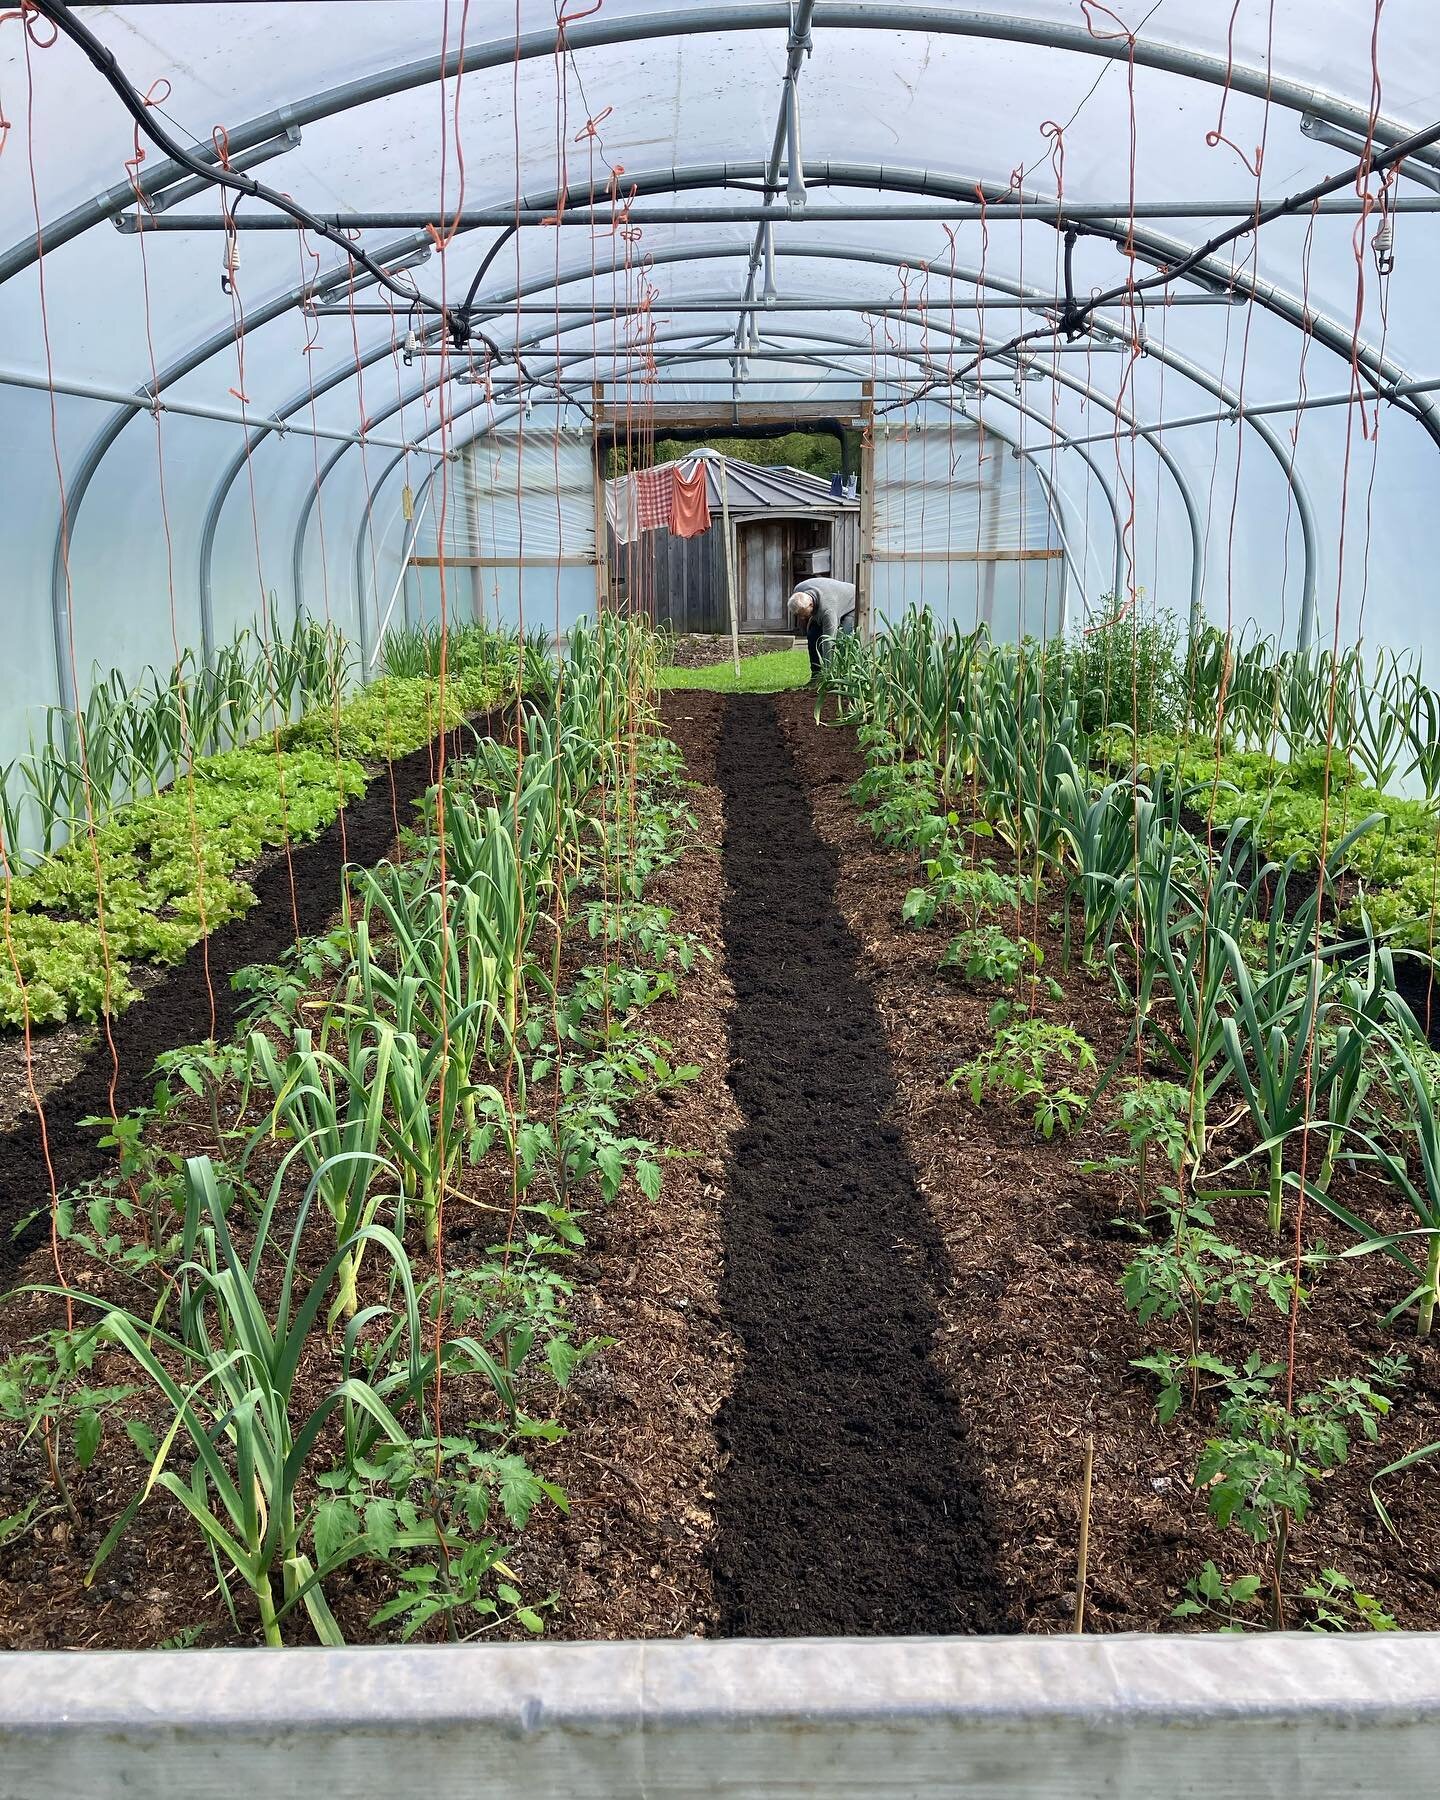 I was excited to be invited to help @charles_dowding  this week at his #marketgarden - 'Homeacres' and I've learned so much about #nodig. What a diverse and hugely enjoyable week 🥬💚🌱
Some on the many highlights in pictures: planting and tying up o